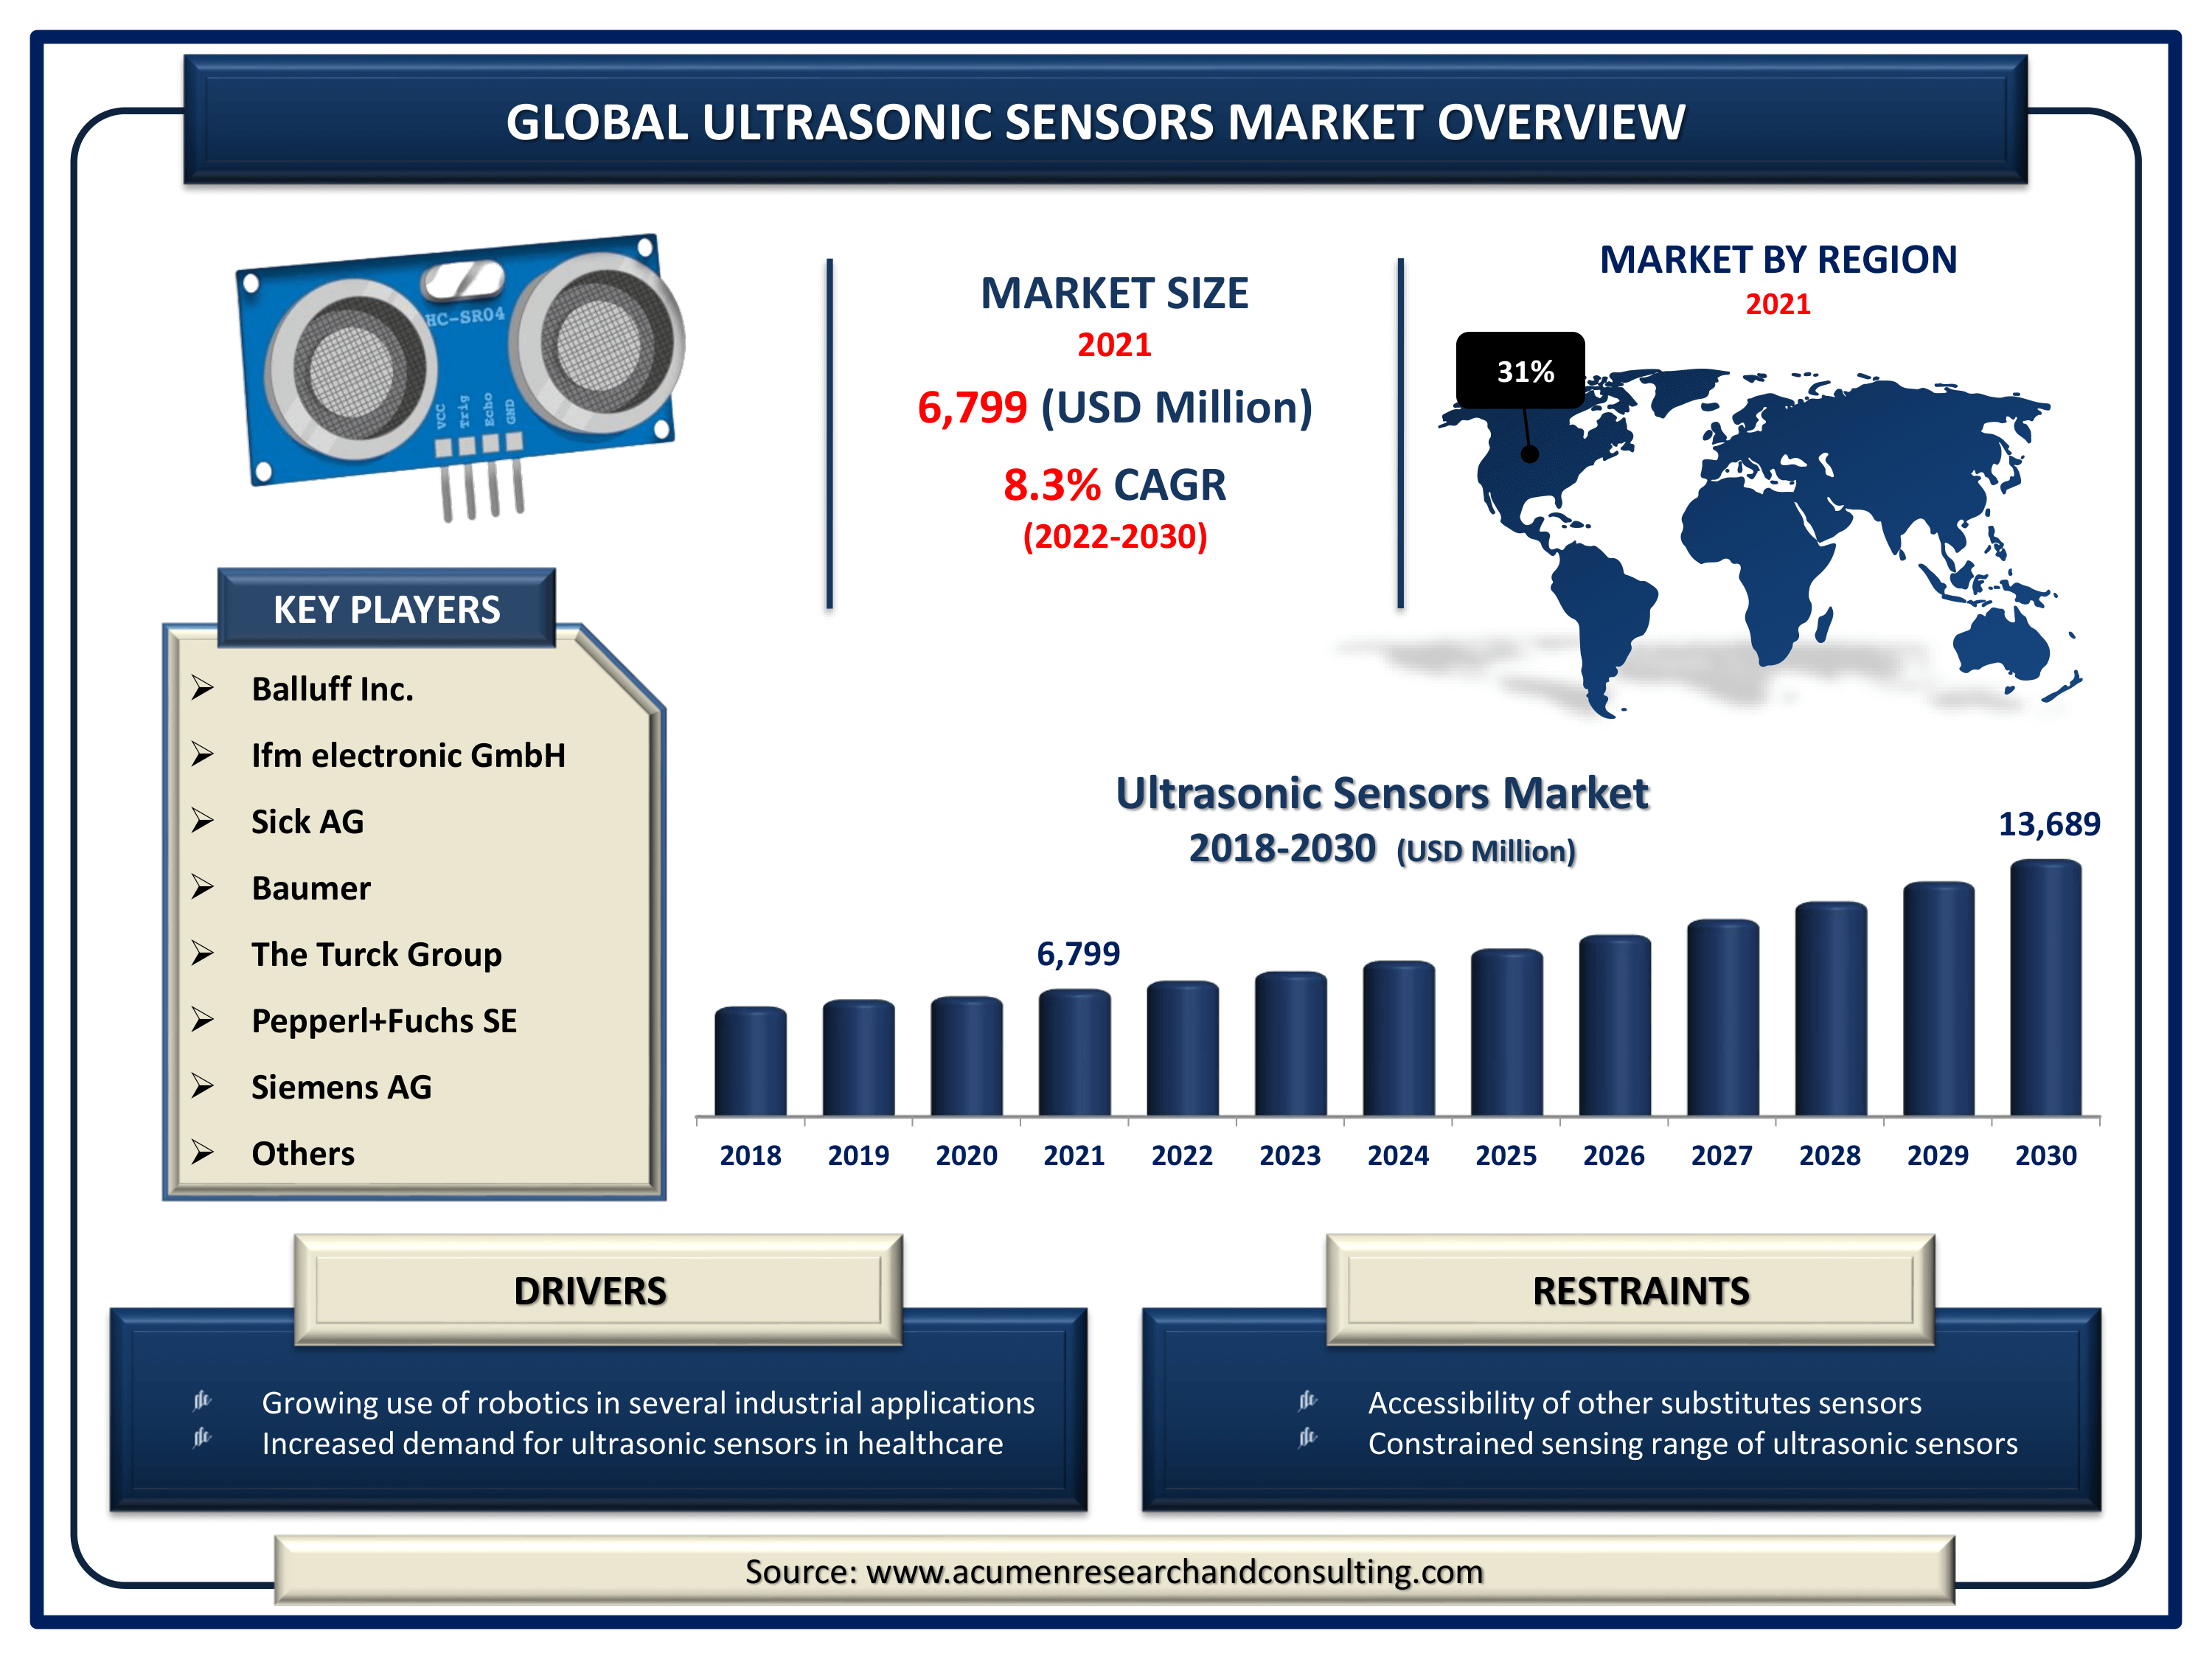 Global ultrasonic sensors market revenue is expected to increase by USD 13,689 million by 2030, with an 8.3% CAGR from 2022 to 2030.